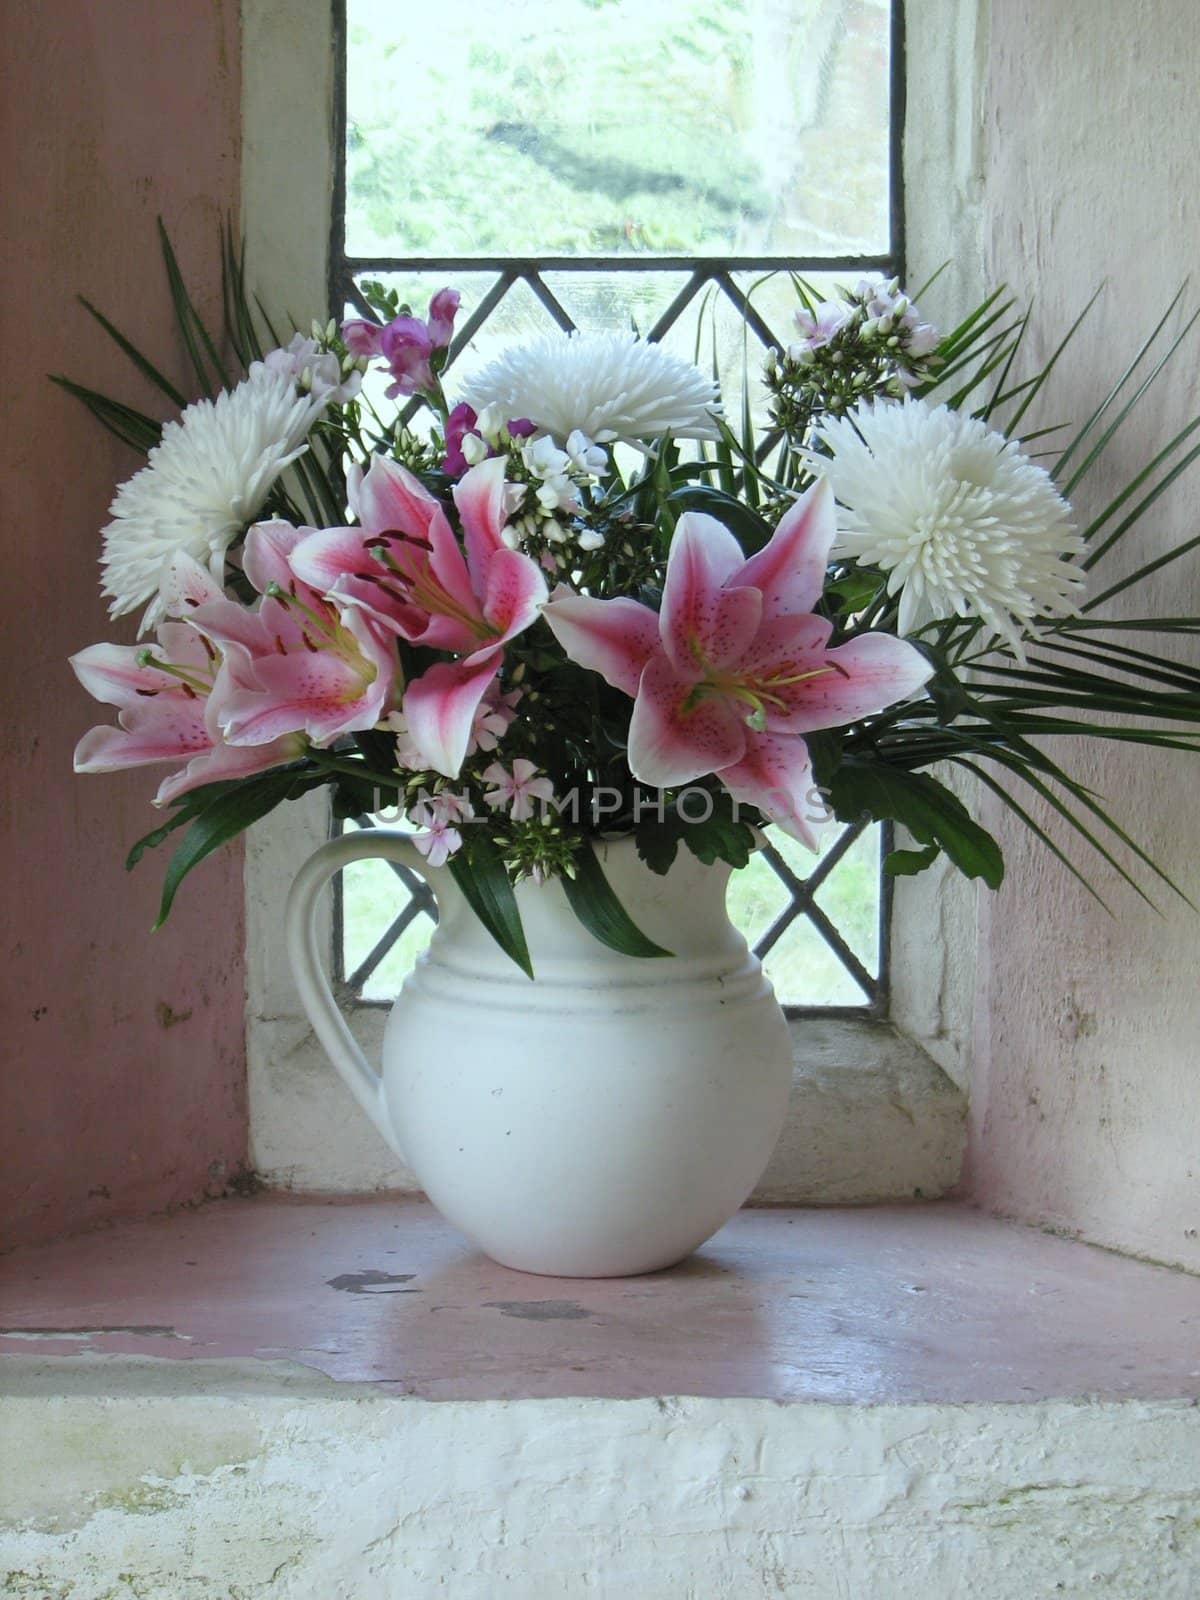 bunch of pink and white flowers standing in a window